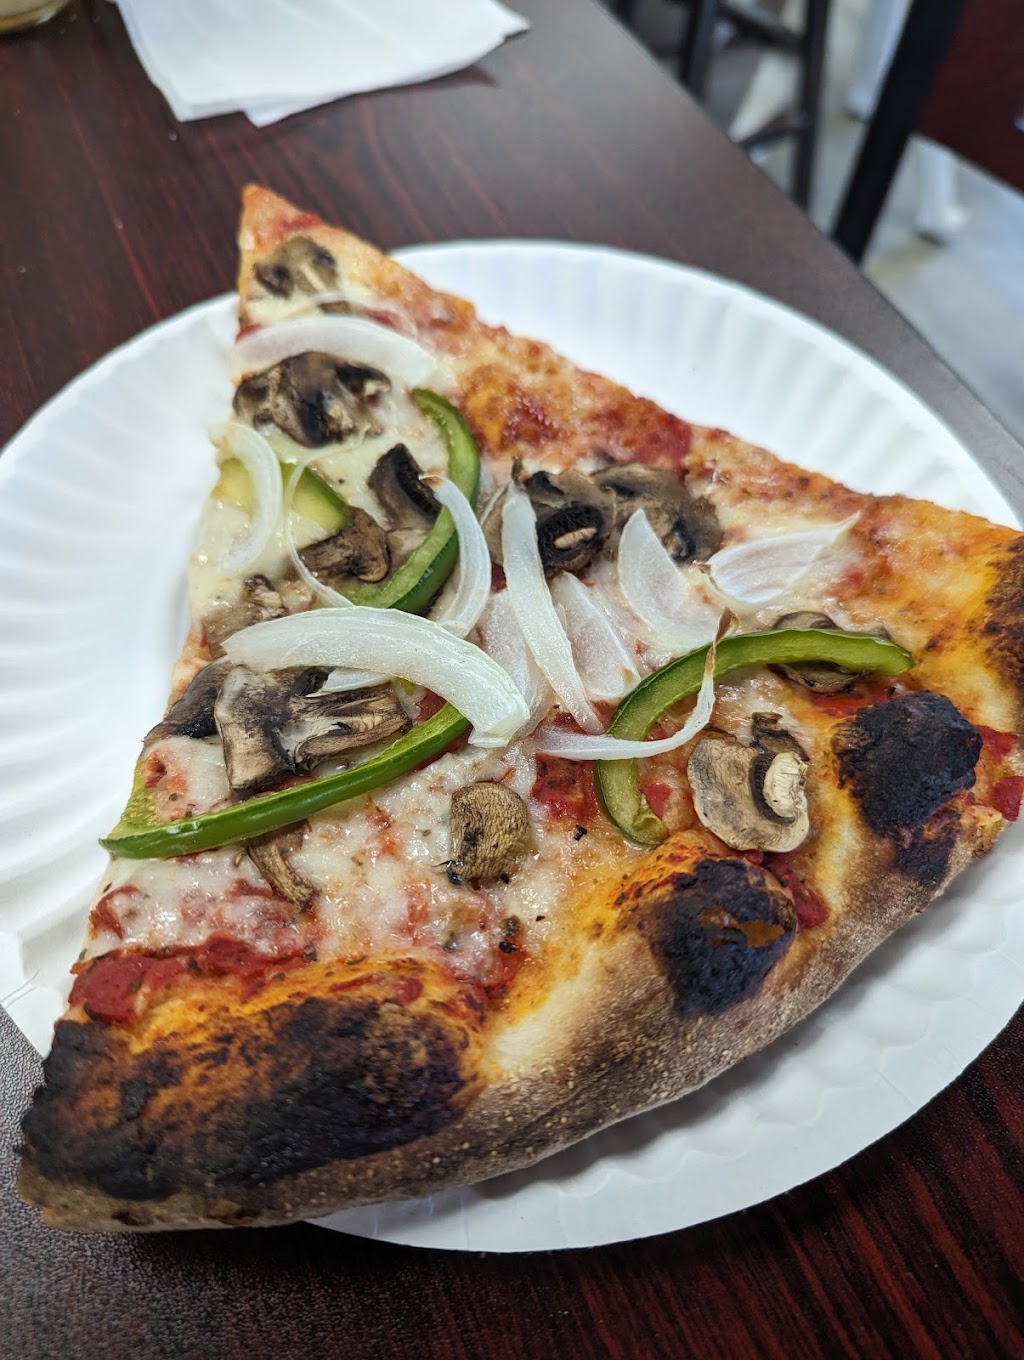 Cousins Woodfire Pizza Cafe | 1706 1726, State Rte 55, Wingdale, NY 12594 | Phone: (845) 832-3600